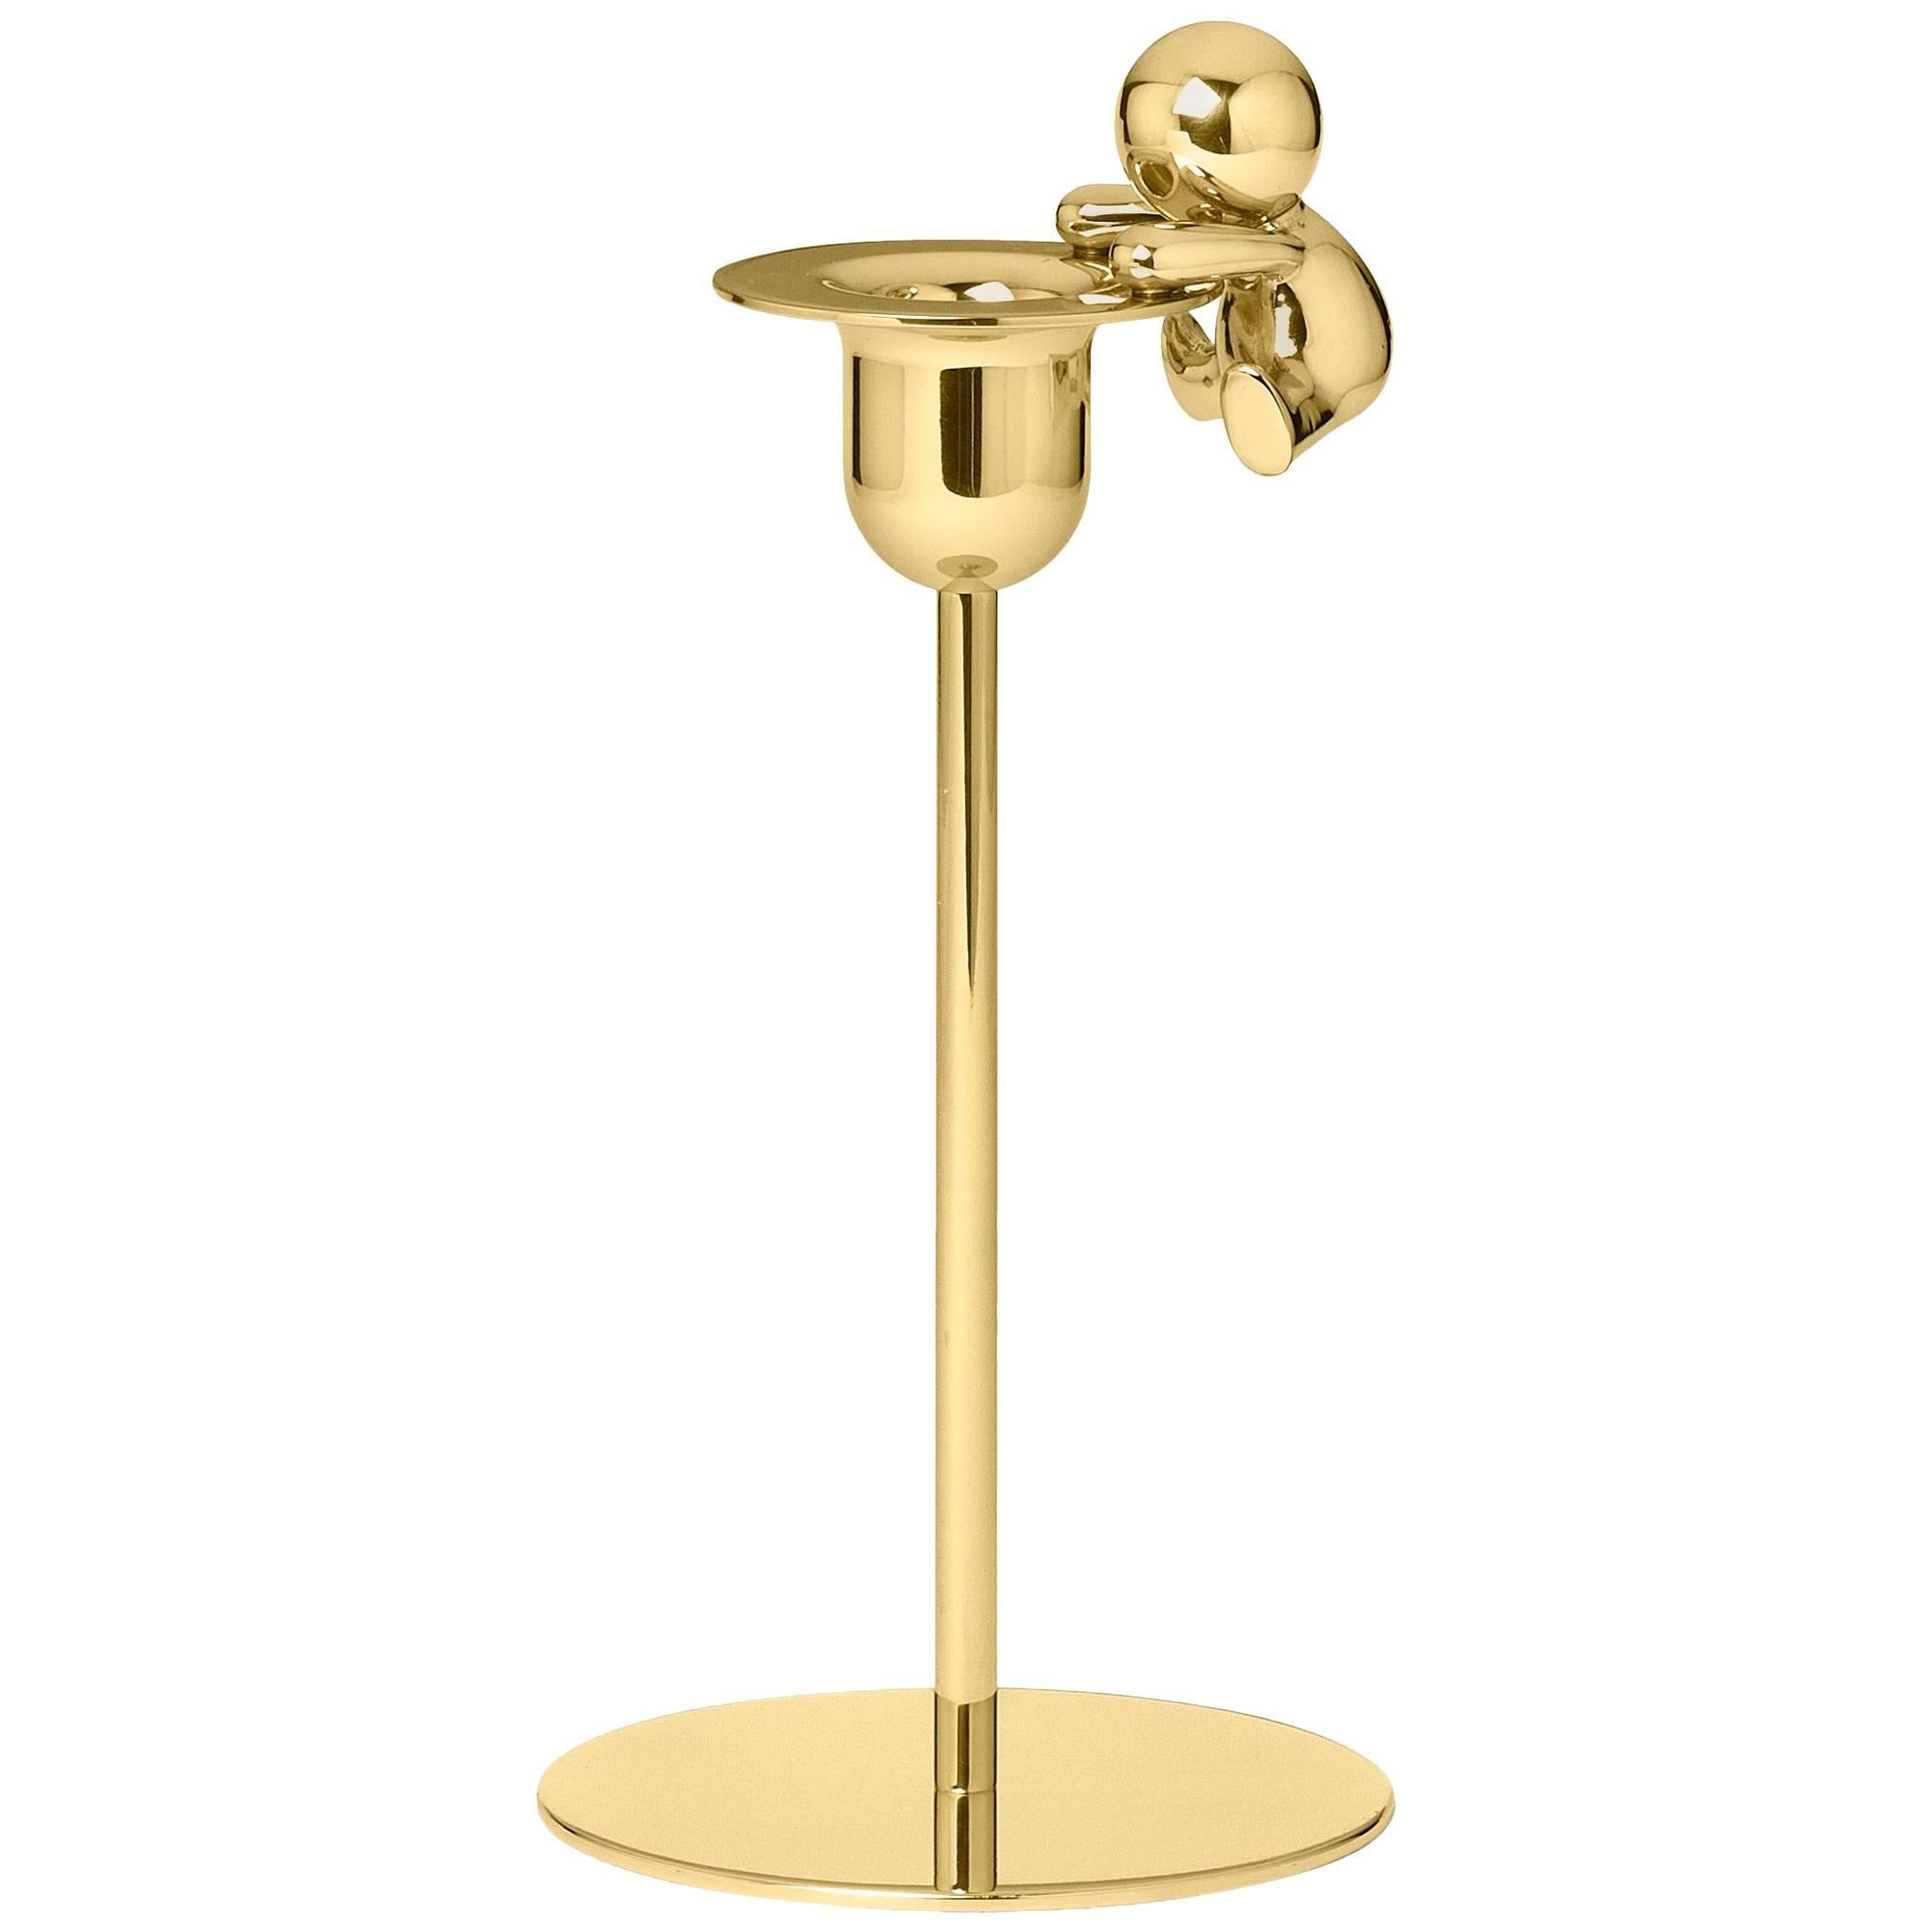 Ghidini 1961 Omini the Climber Short Candlestick in Polished Brass